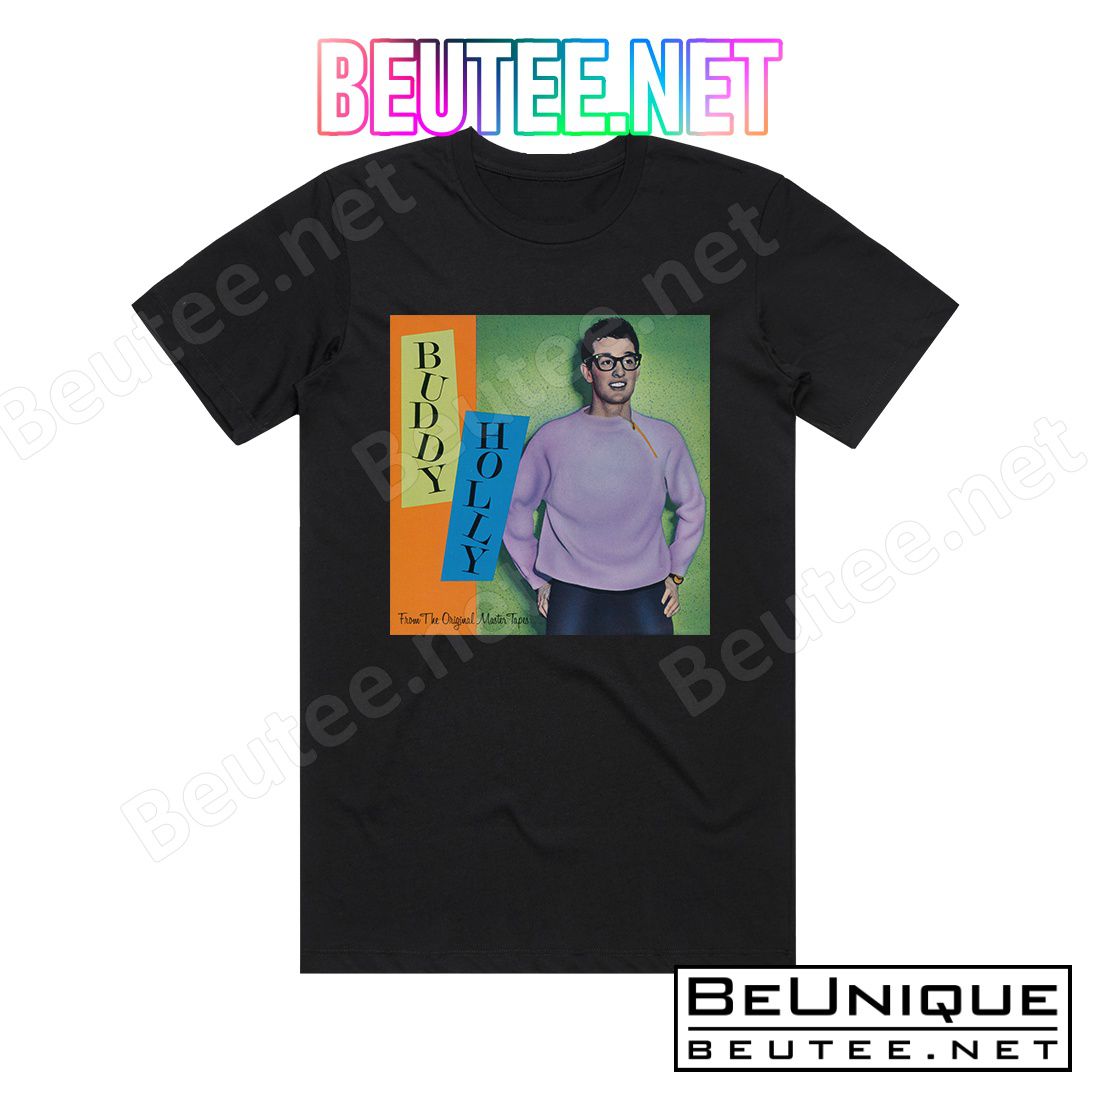 Buddy Holly From The Original Master Tapes Album Cover T-Shirt